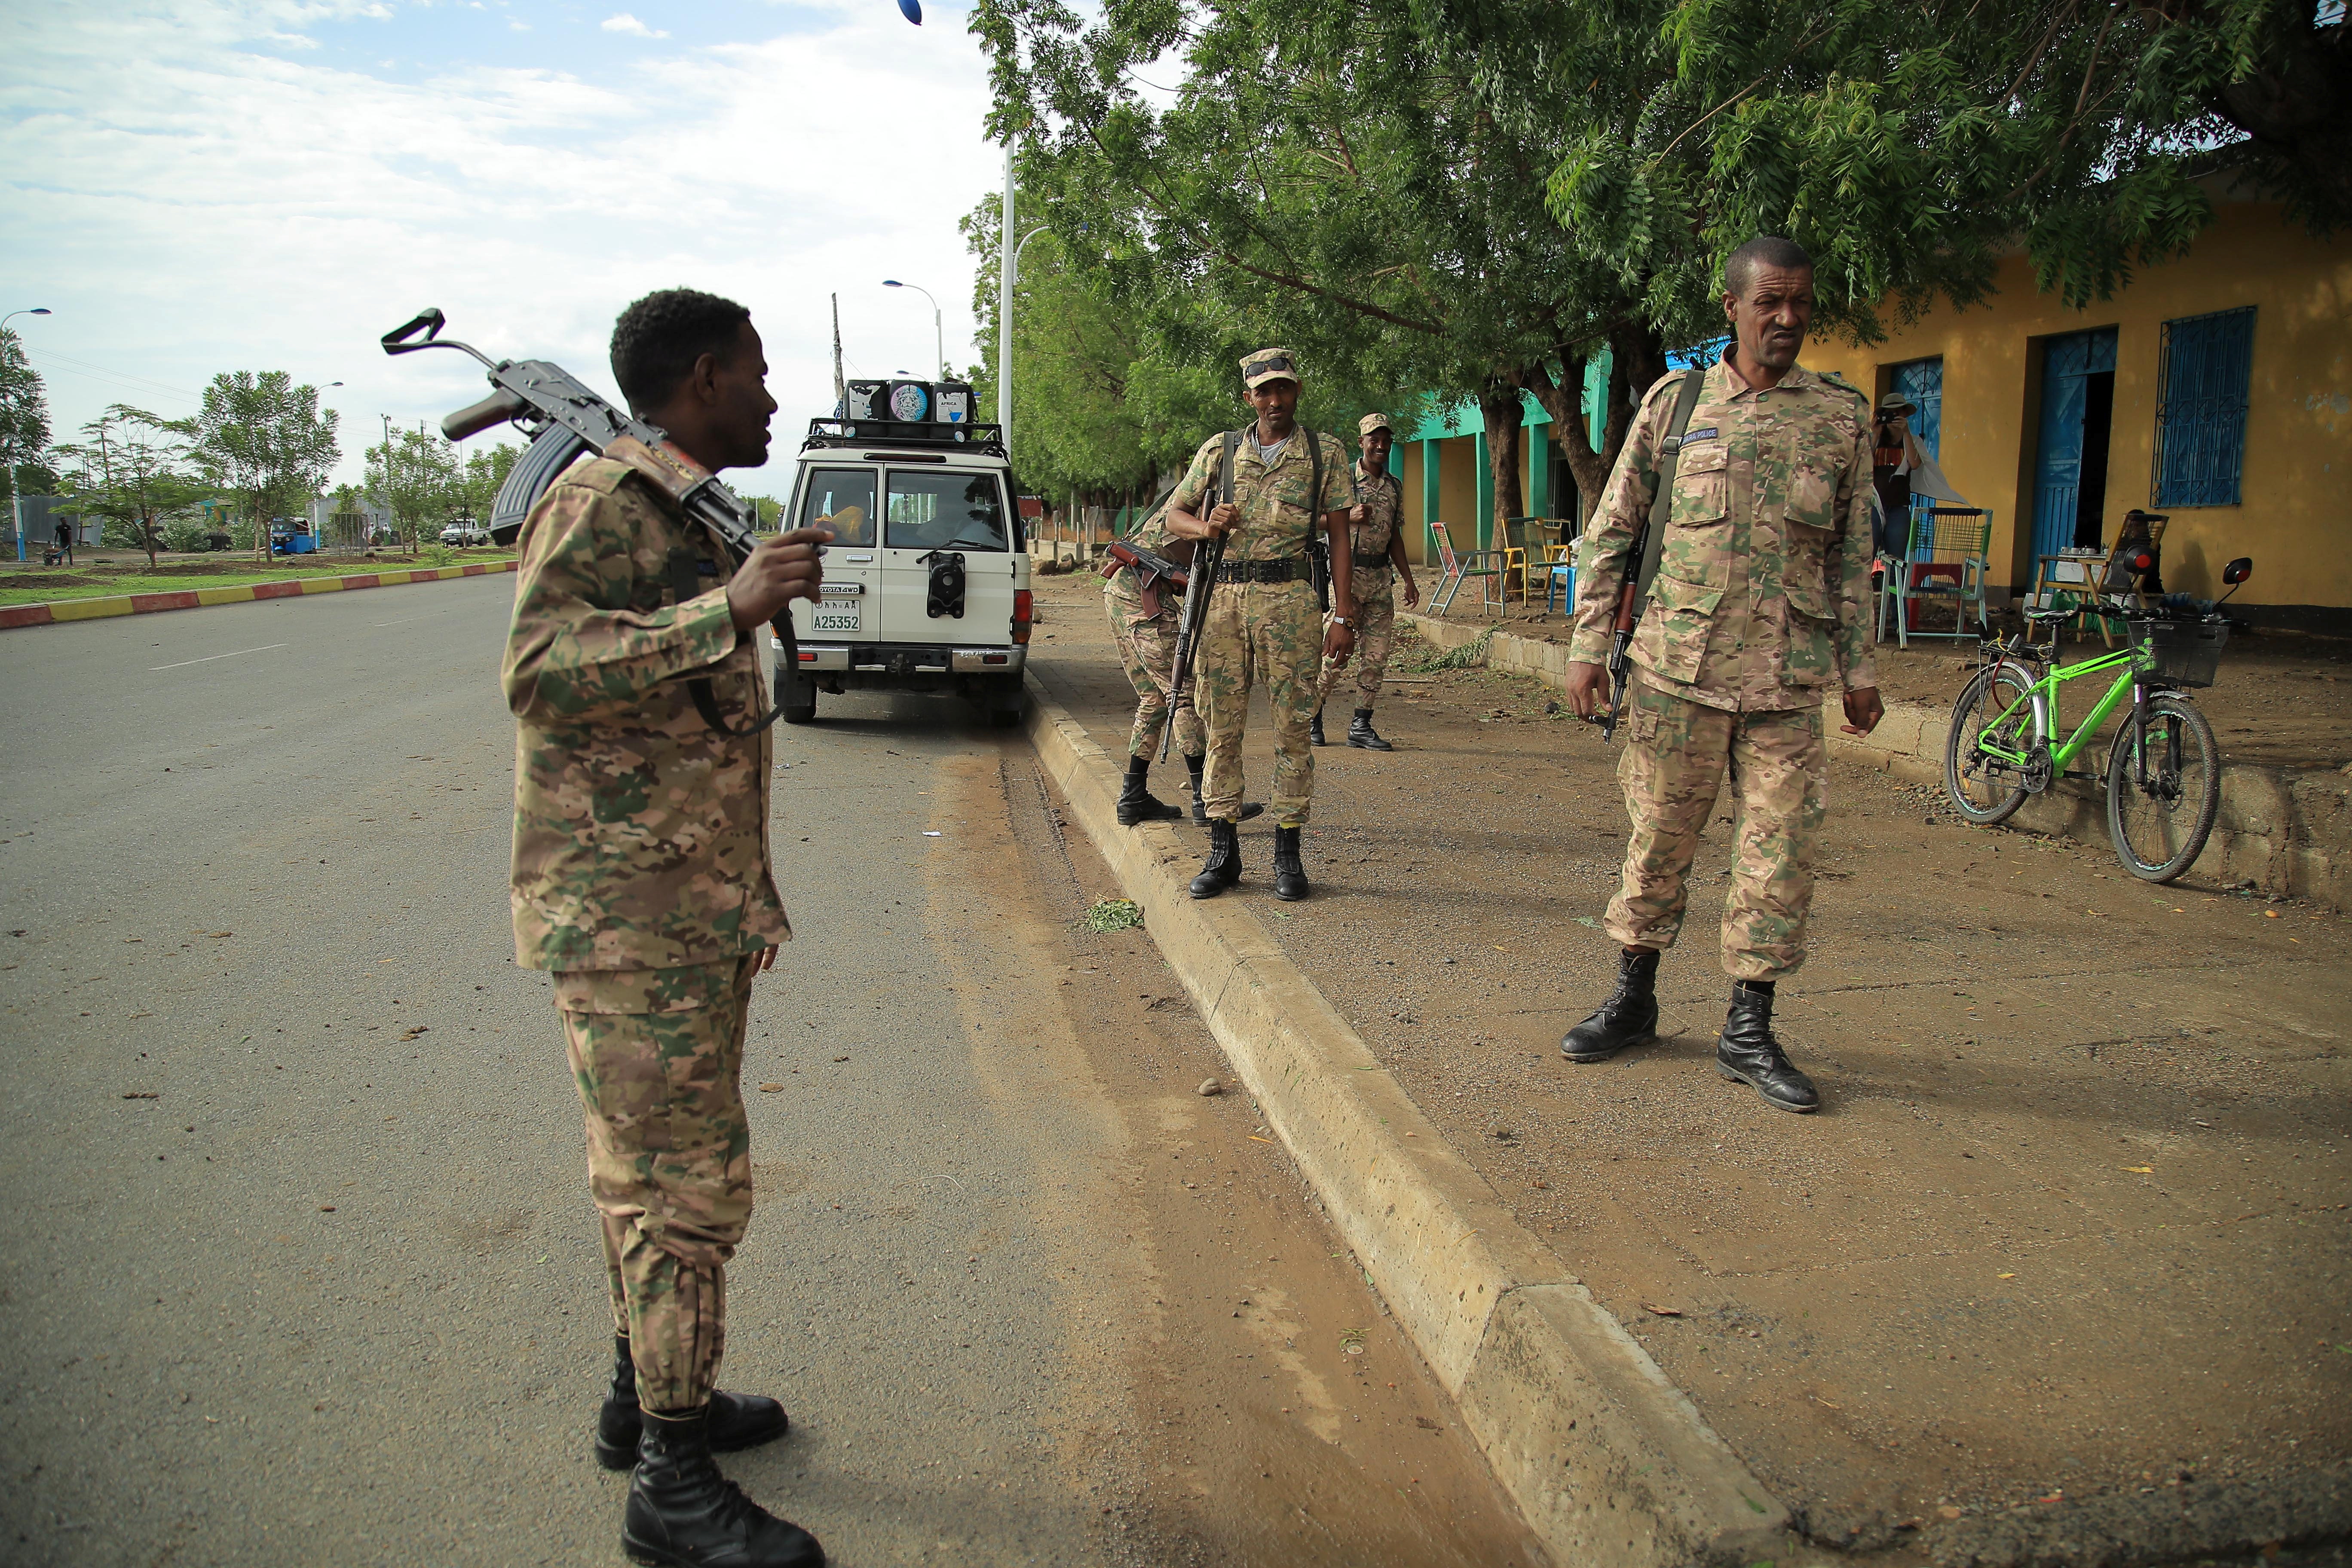 Members of Amhara Special Forces stand guard along a street in Humera town